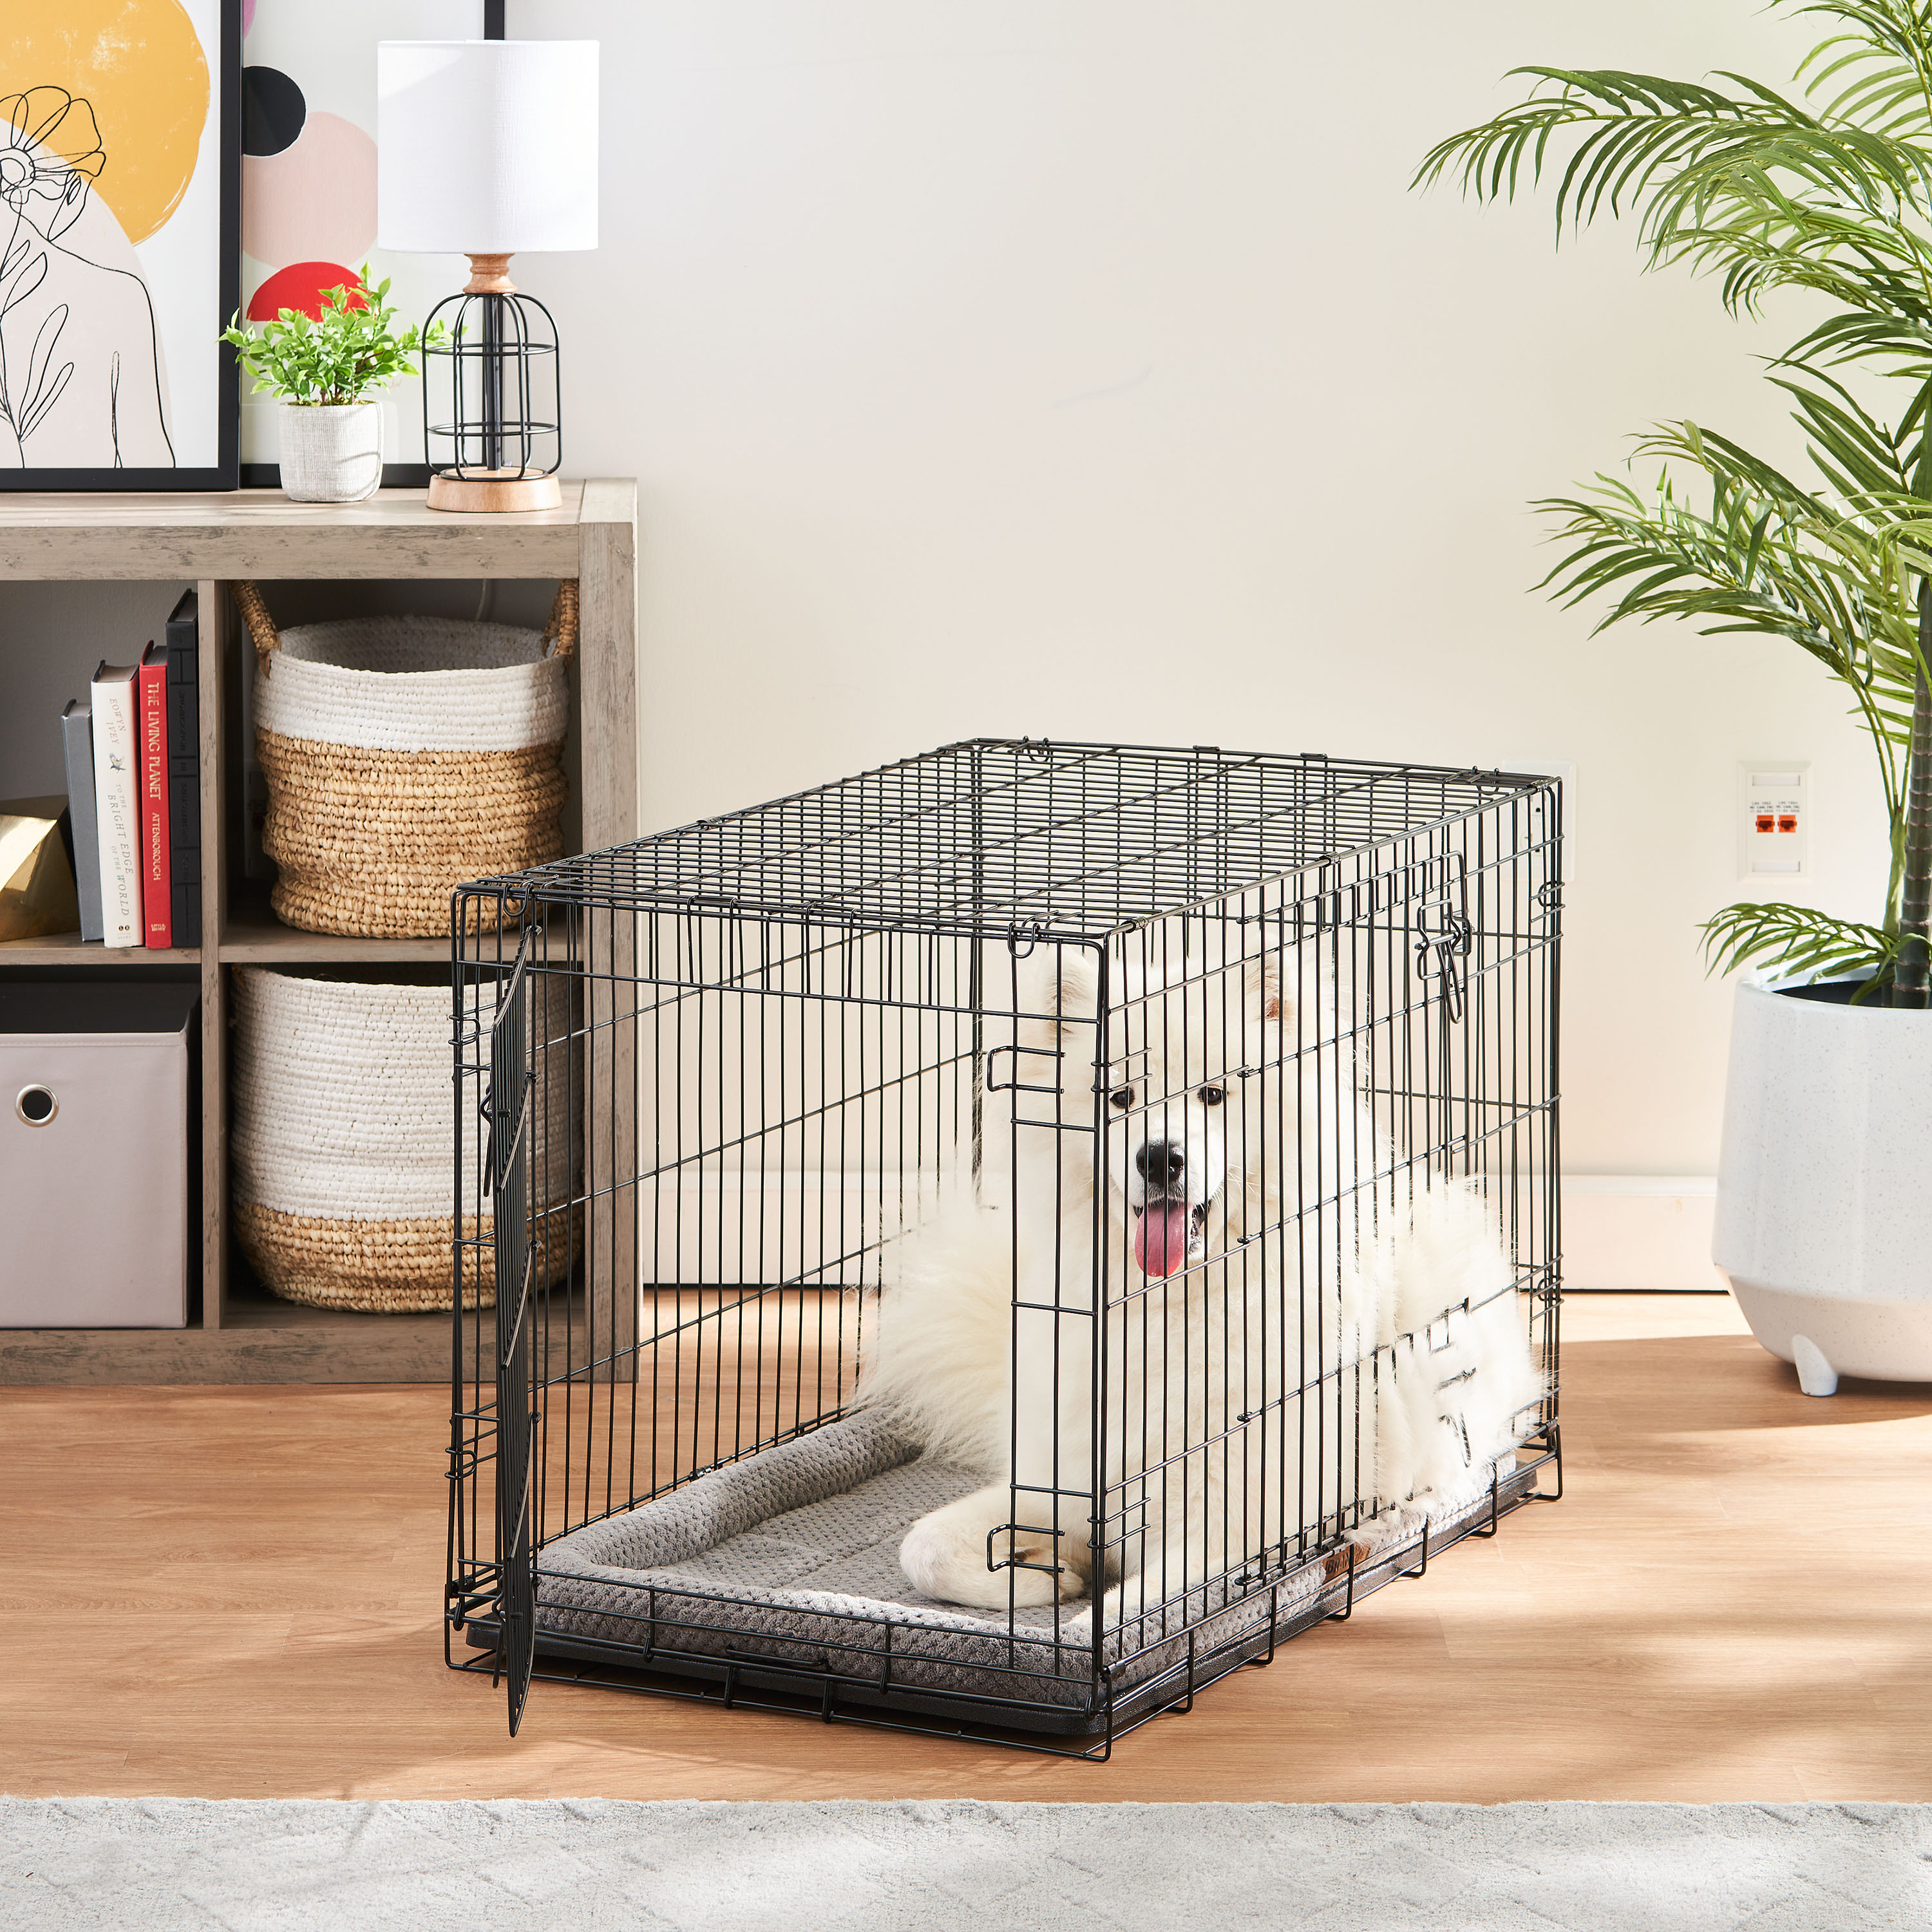 Vibrant Life Double Door Metal Wire Dog Crate with Leak-Proof Pan and Divider，36 inch - image 2 of 9